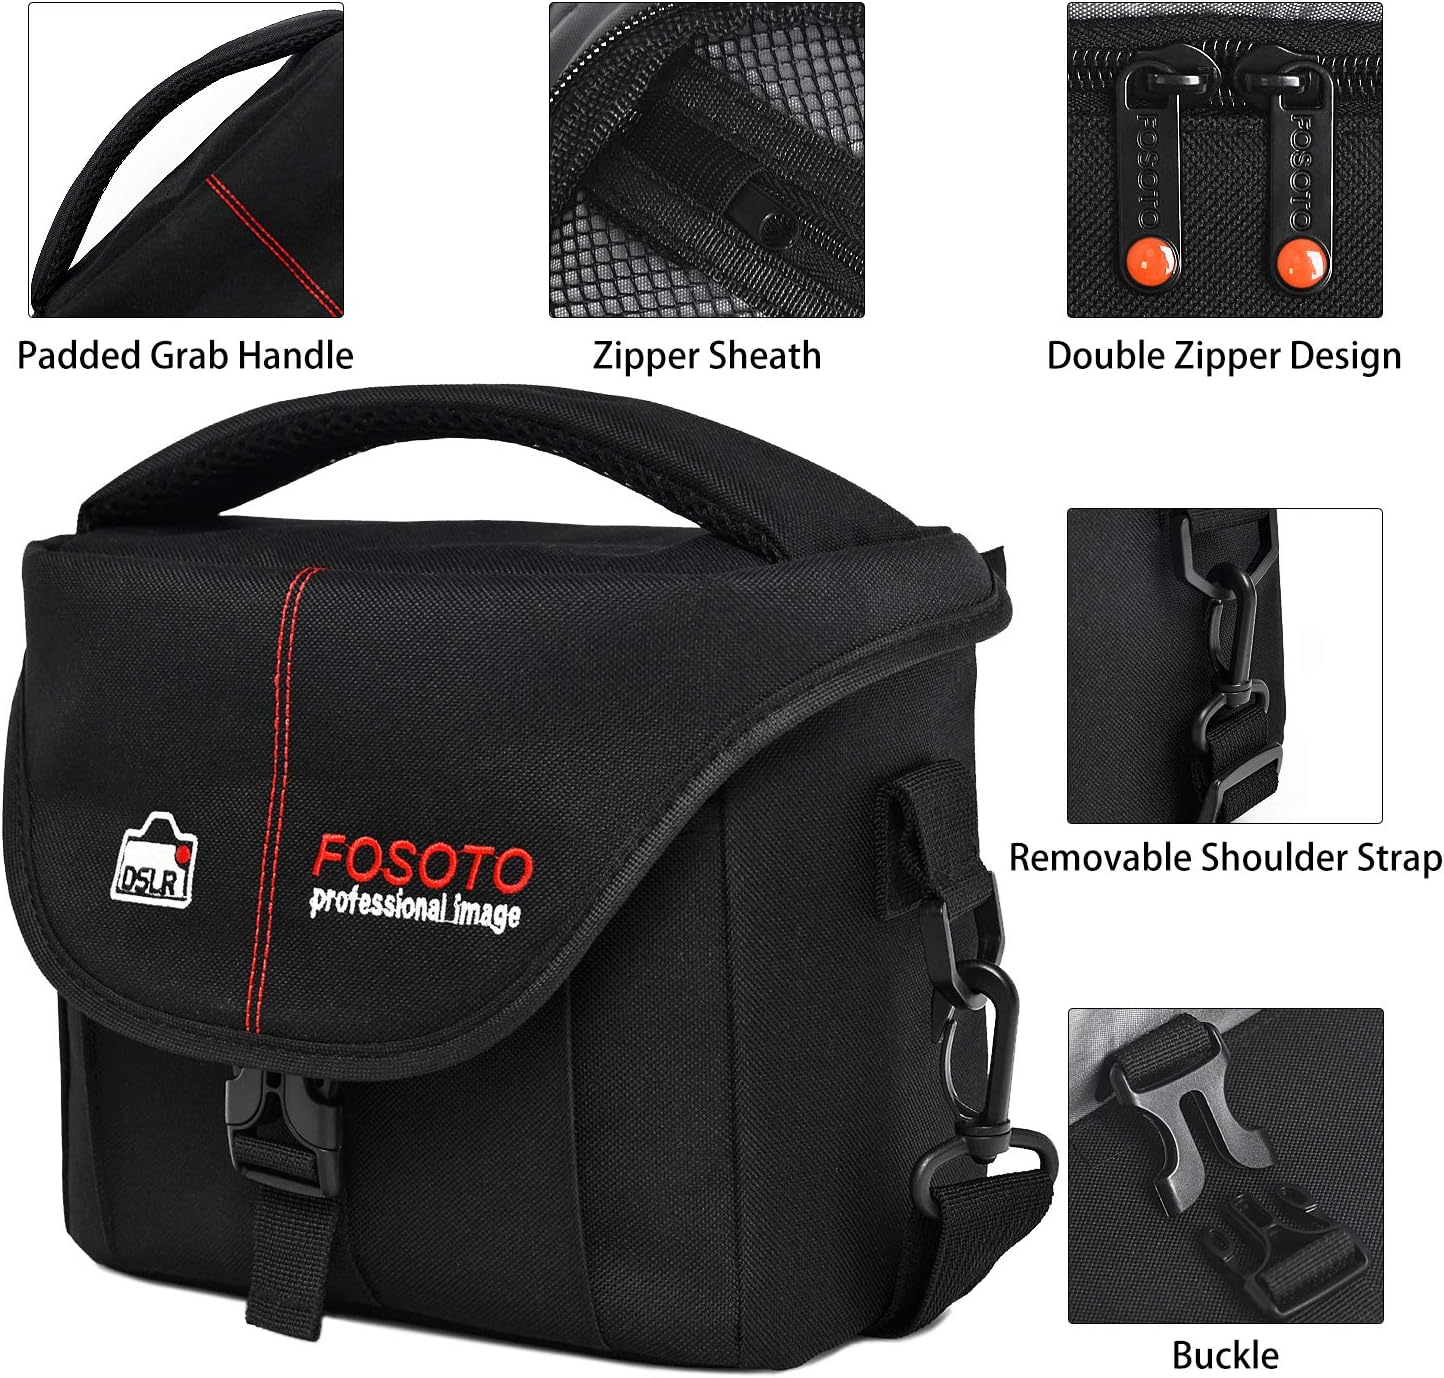 FOSOTO DSLR Camera Case Bag Compatible for Nikon D3400 D5500 D5600 D7200 D810 D750 D610 D60,Canon EOS T3 T4i T5i T6 T7 T7i SL1,Fuji X-T3 and more